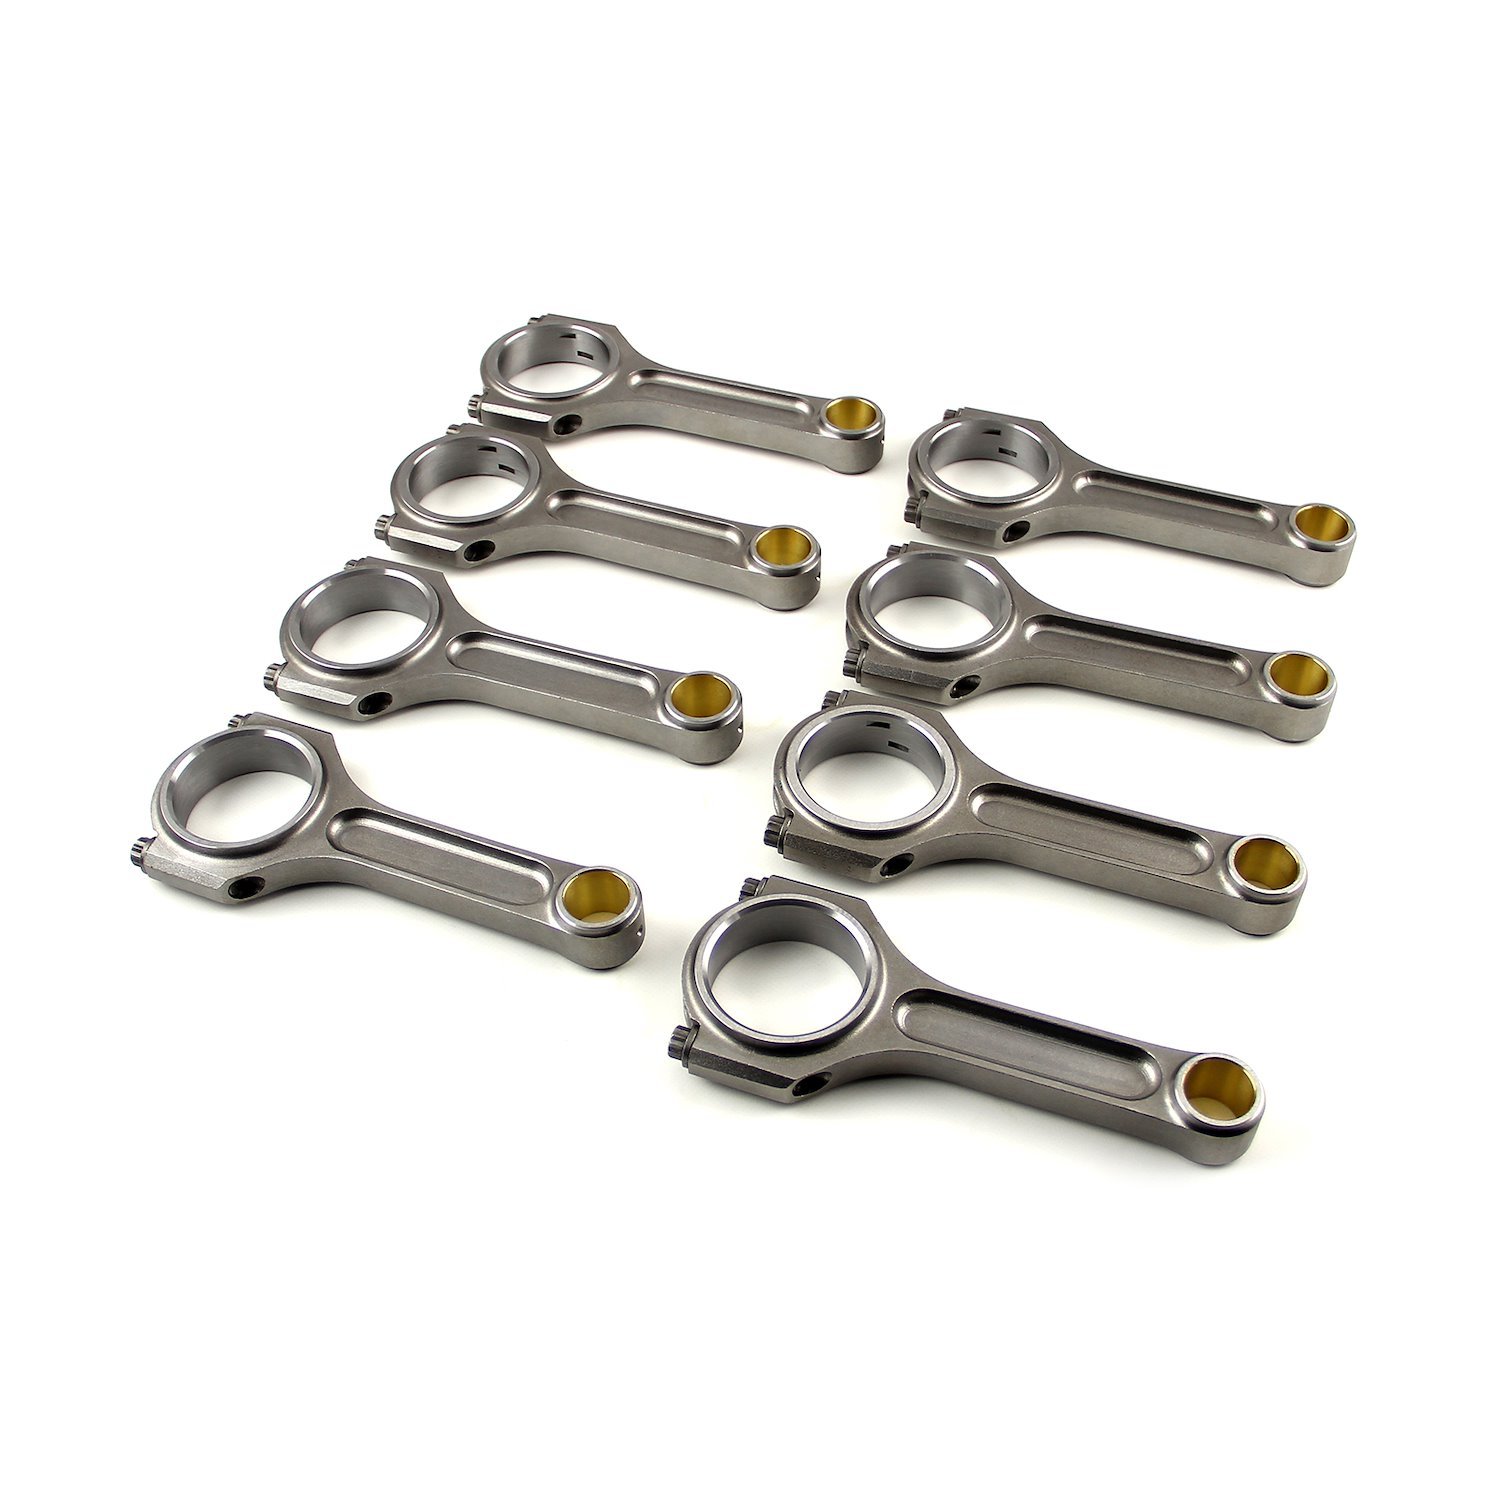 I Beam Race 5.400 2.123 .927 Bronze Bush 4340 Connecting Rods - Ford 302